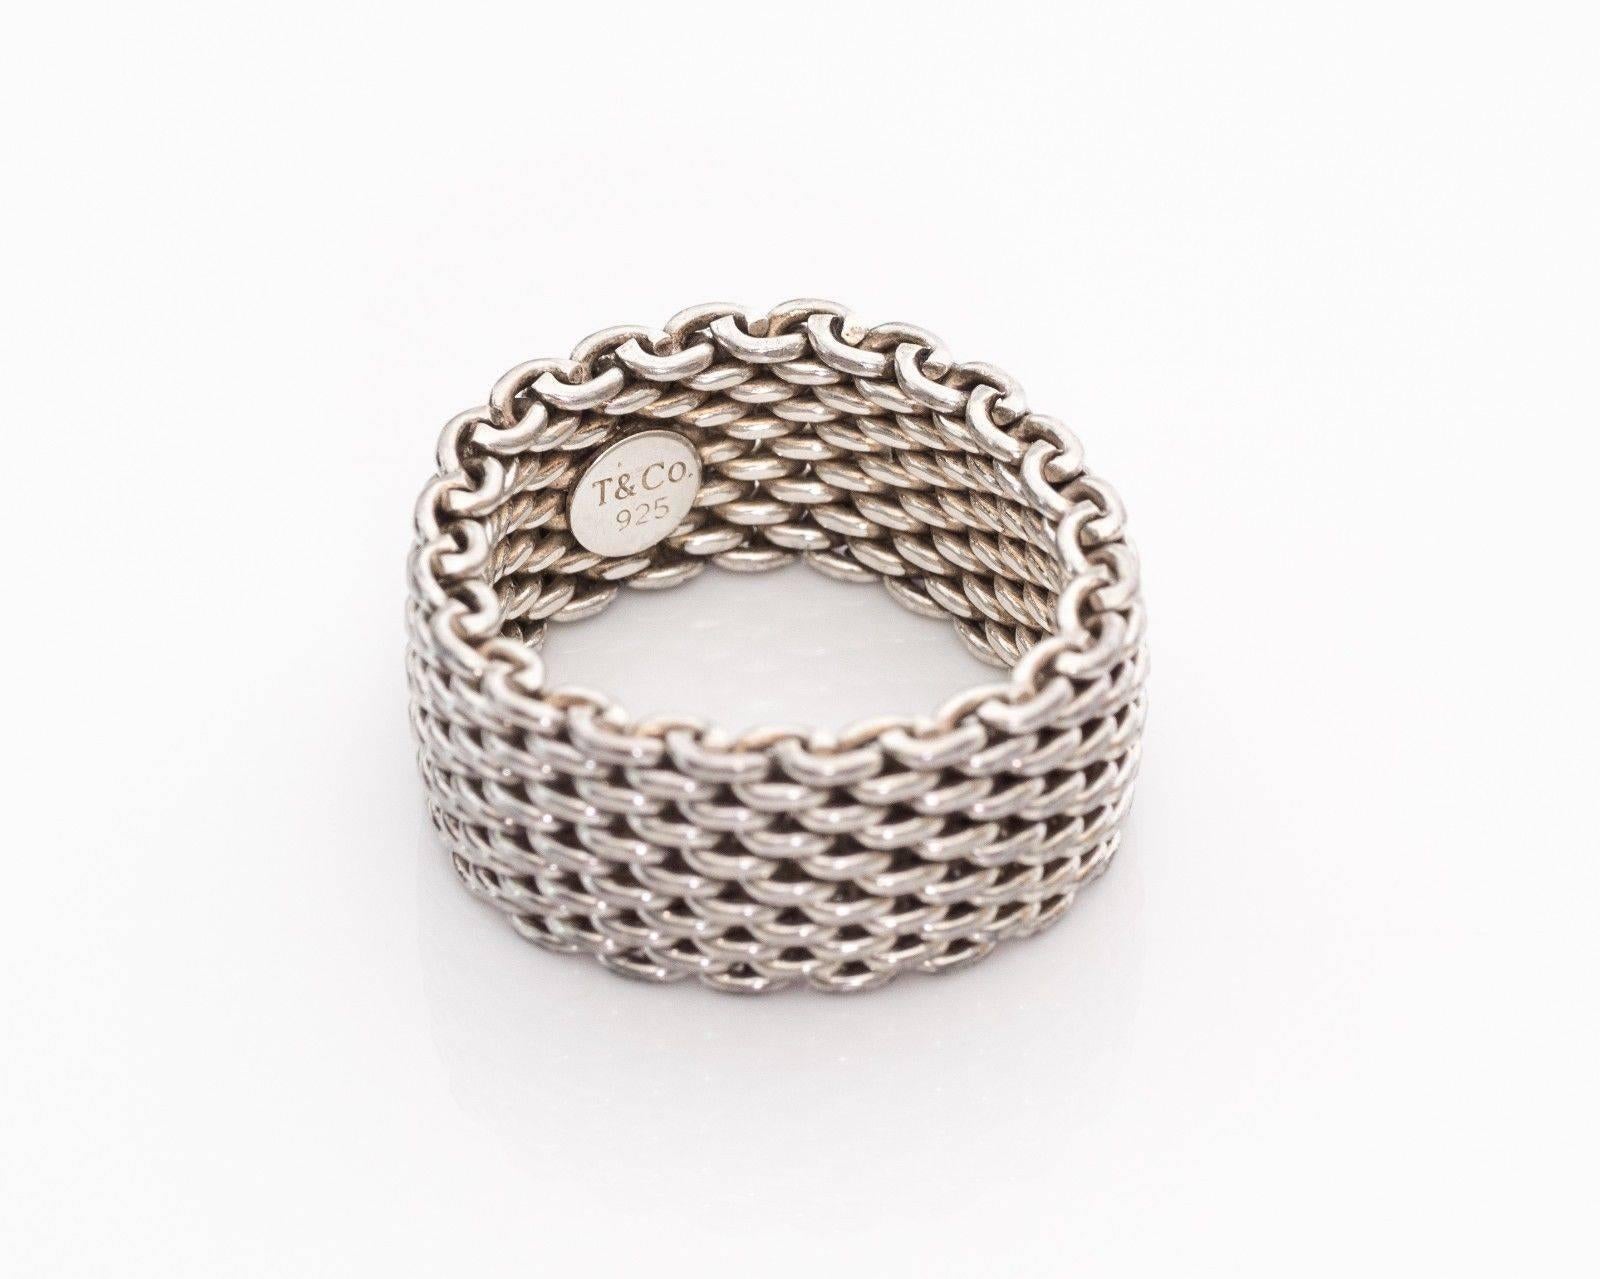 The Somerset collection at Tiffany and Co. is a style for everyday wear. The mesh chain link ring is 10 mm thick and made of sterling silver. The mesh design is flexible, ensuring it's easy to put on and comfortable to wear. 

This ring is